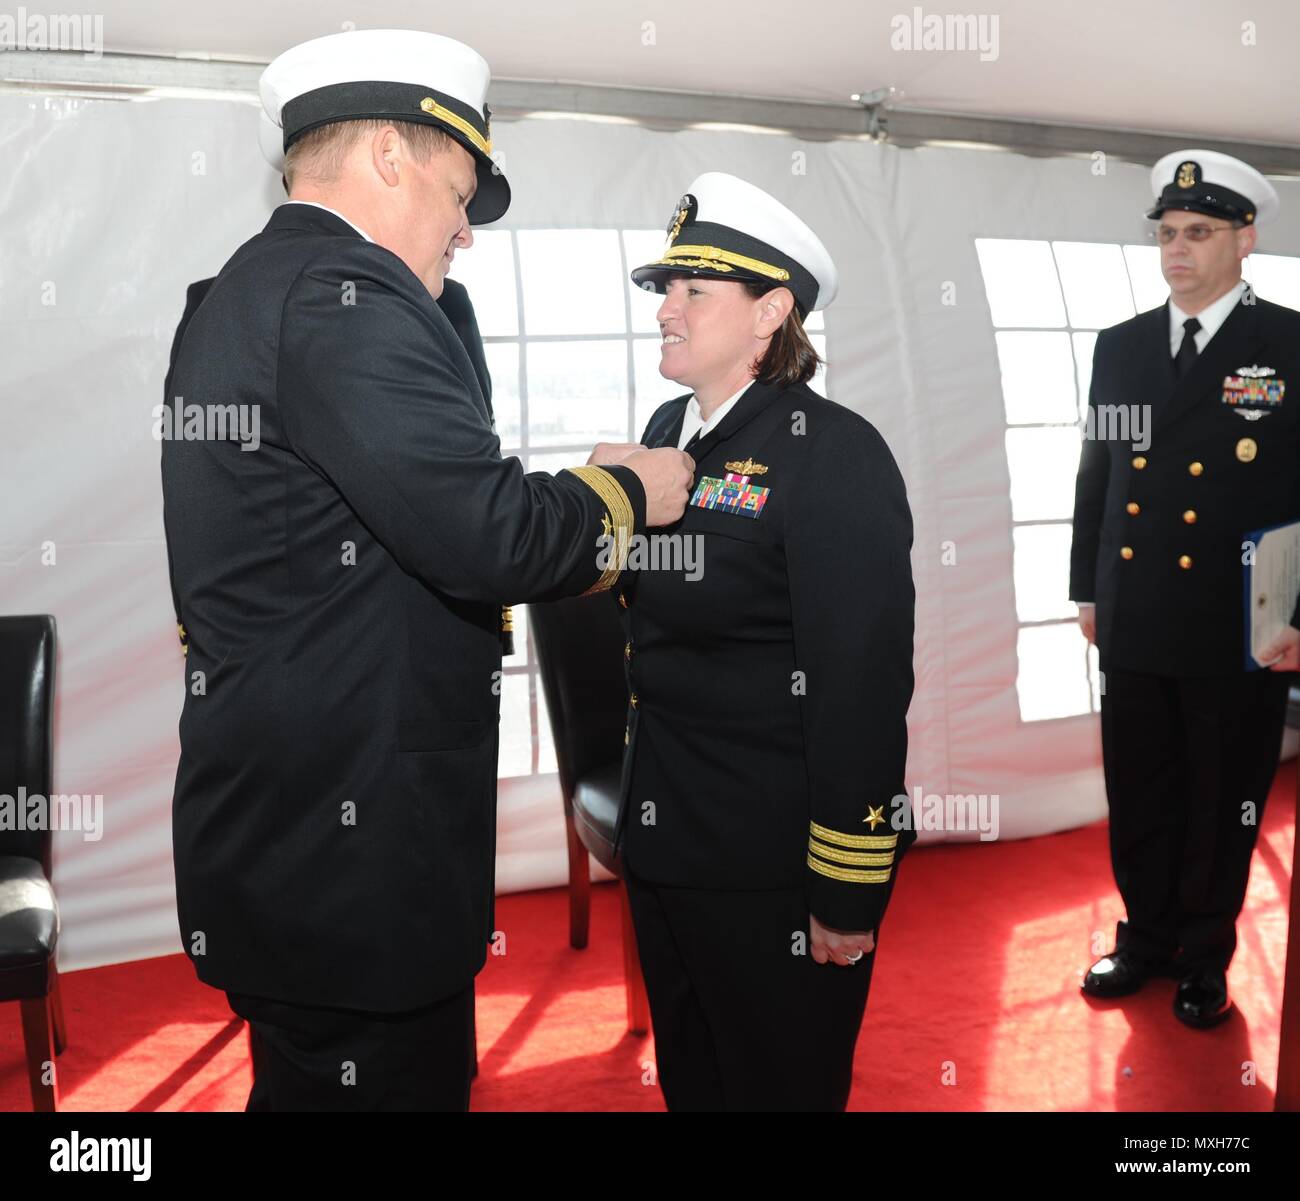 161104-N-MV682-002 NORFOLK (Nov. 4, 2016) Capt. Larry Legree, left, Commander, Amphibious Squadron EIGHT (PHIBRON 8) awards Cmdr. Tina Dalmau a Meritorious Service Medal during a change of command ceremony for dock landing ship USS Carter Hall (LSD 50) held on Joint Expeditionary Base Little Creek-Fort Story. (U.S. Navy photo by Mass Communication Specialist 2nd Class Jamie V. Cosby/Released) Stock Photo